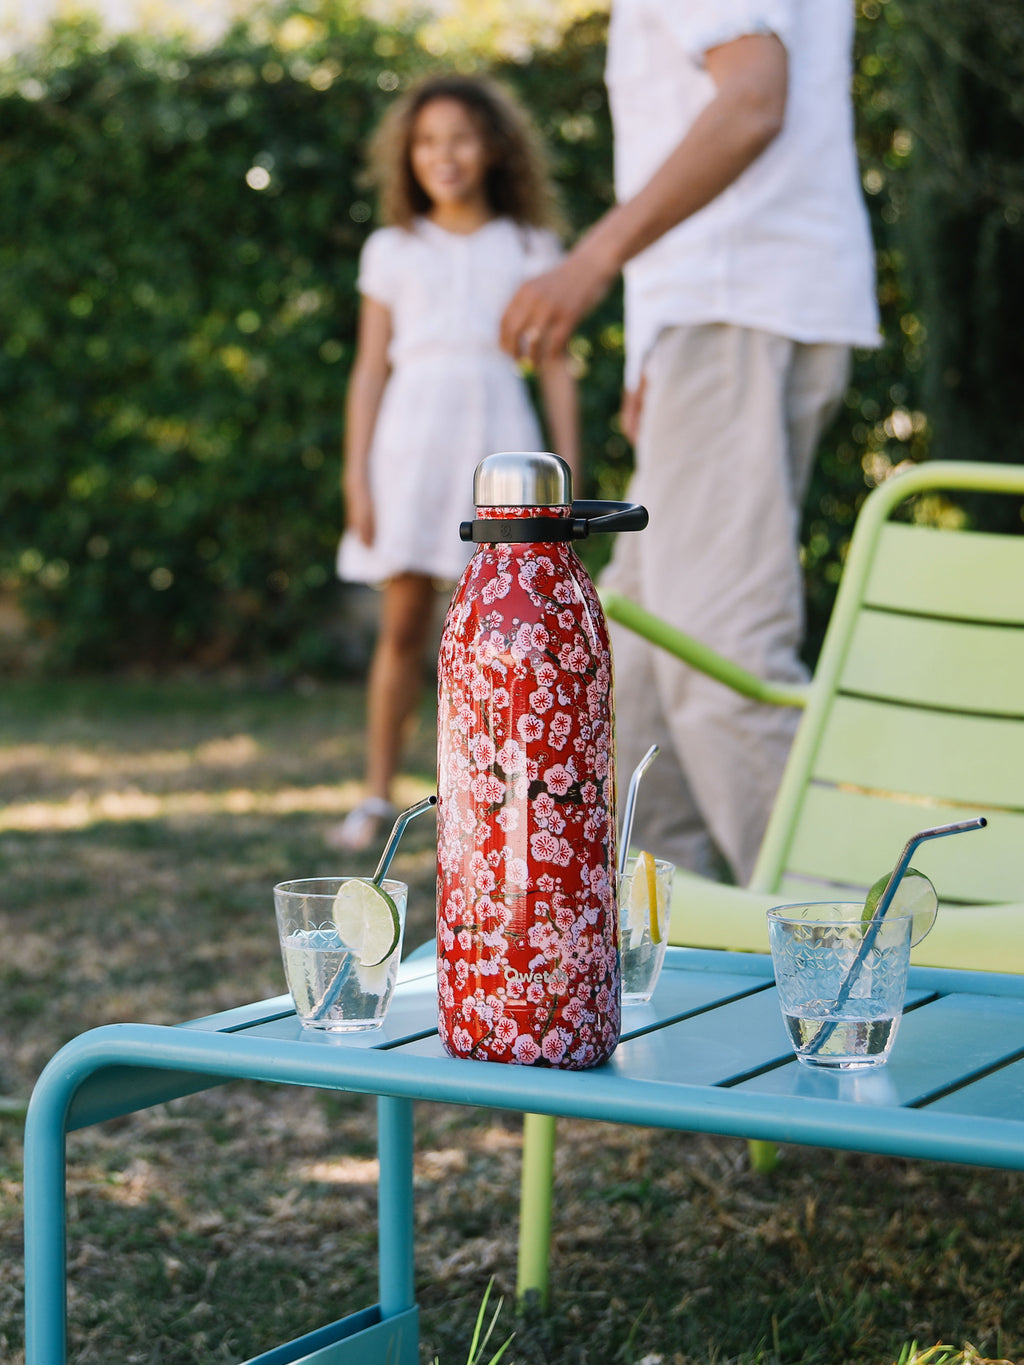 Insulated Bottle - Titan Flowers Red